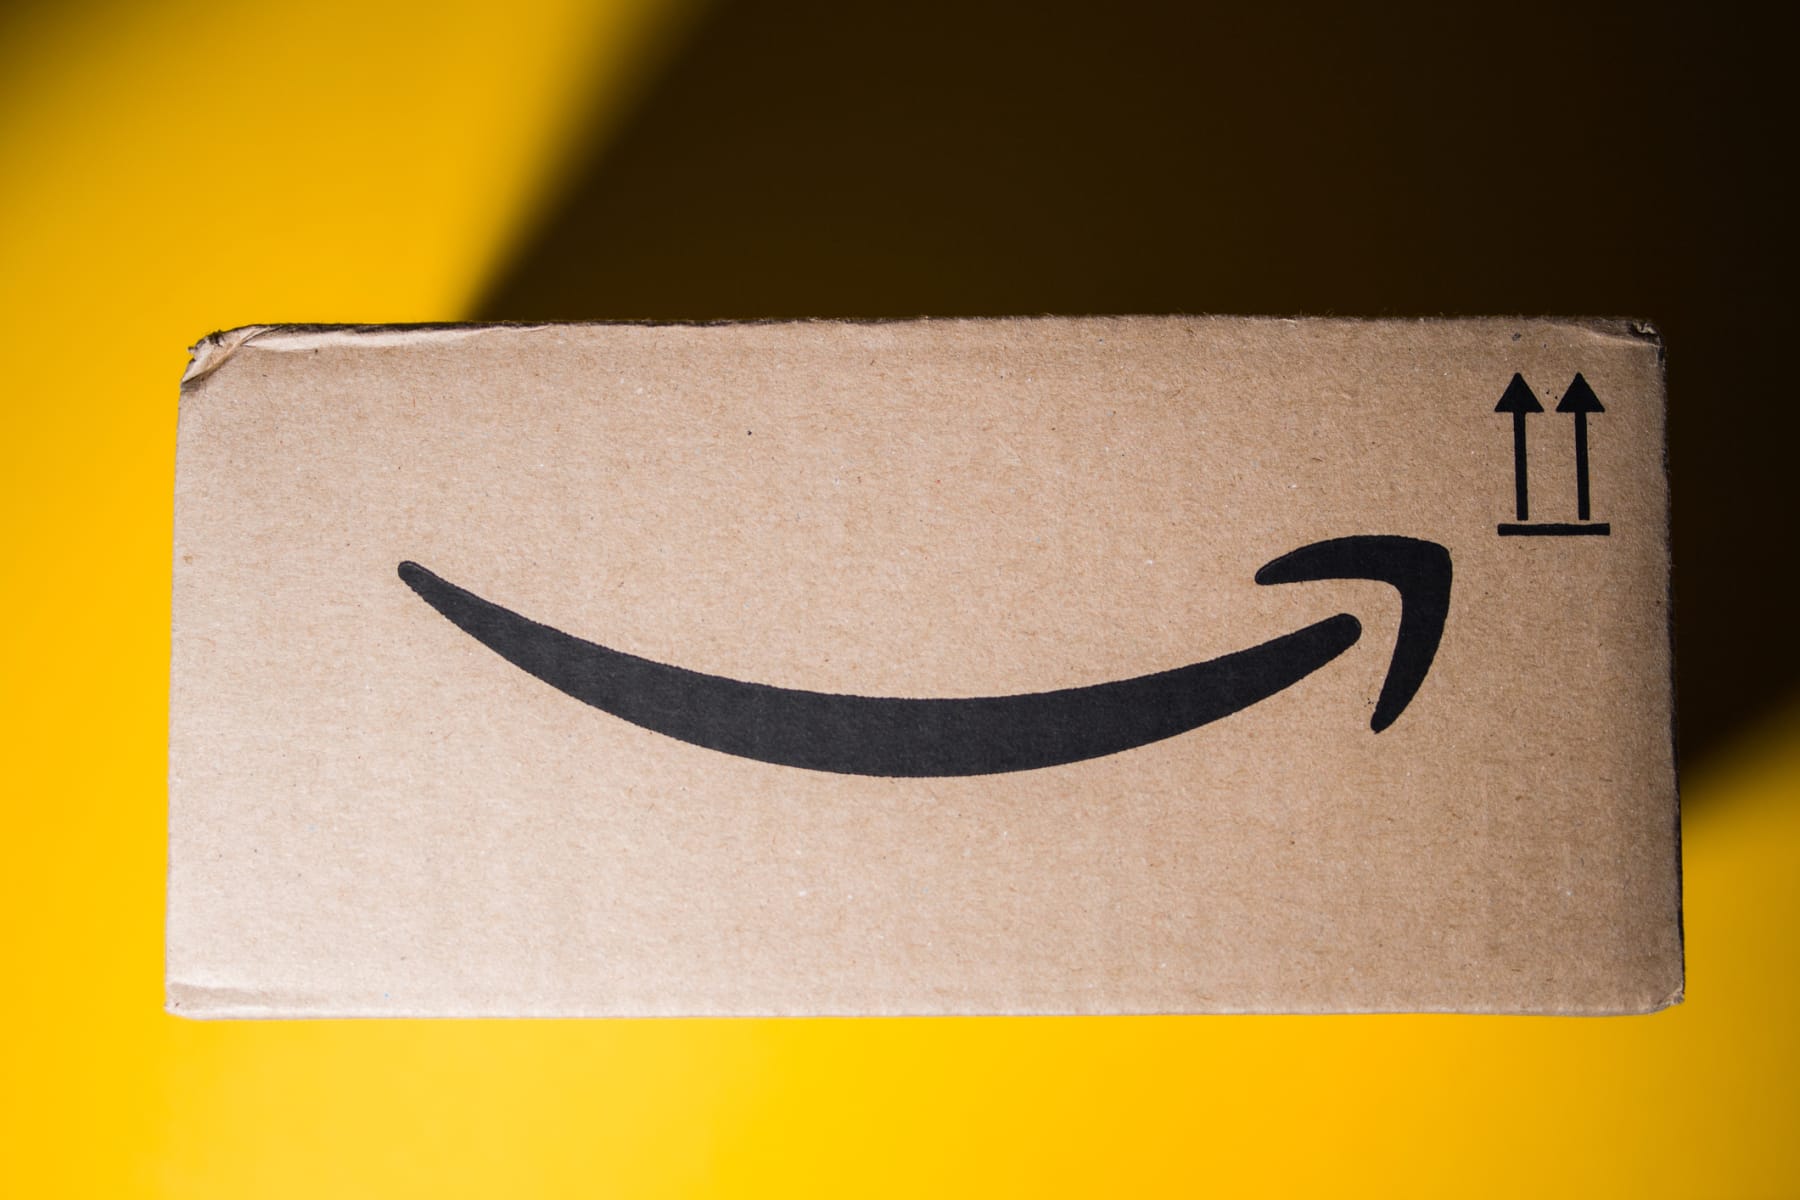 An Amazon box, with the smile arrow logo facing outward, in front of a yellow background.